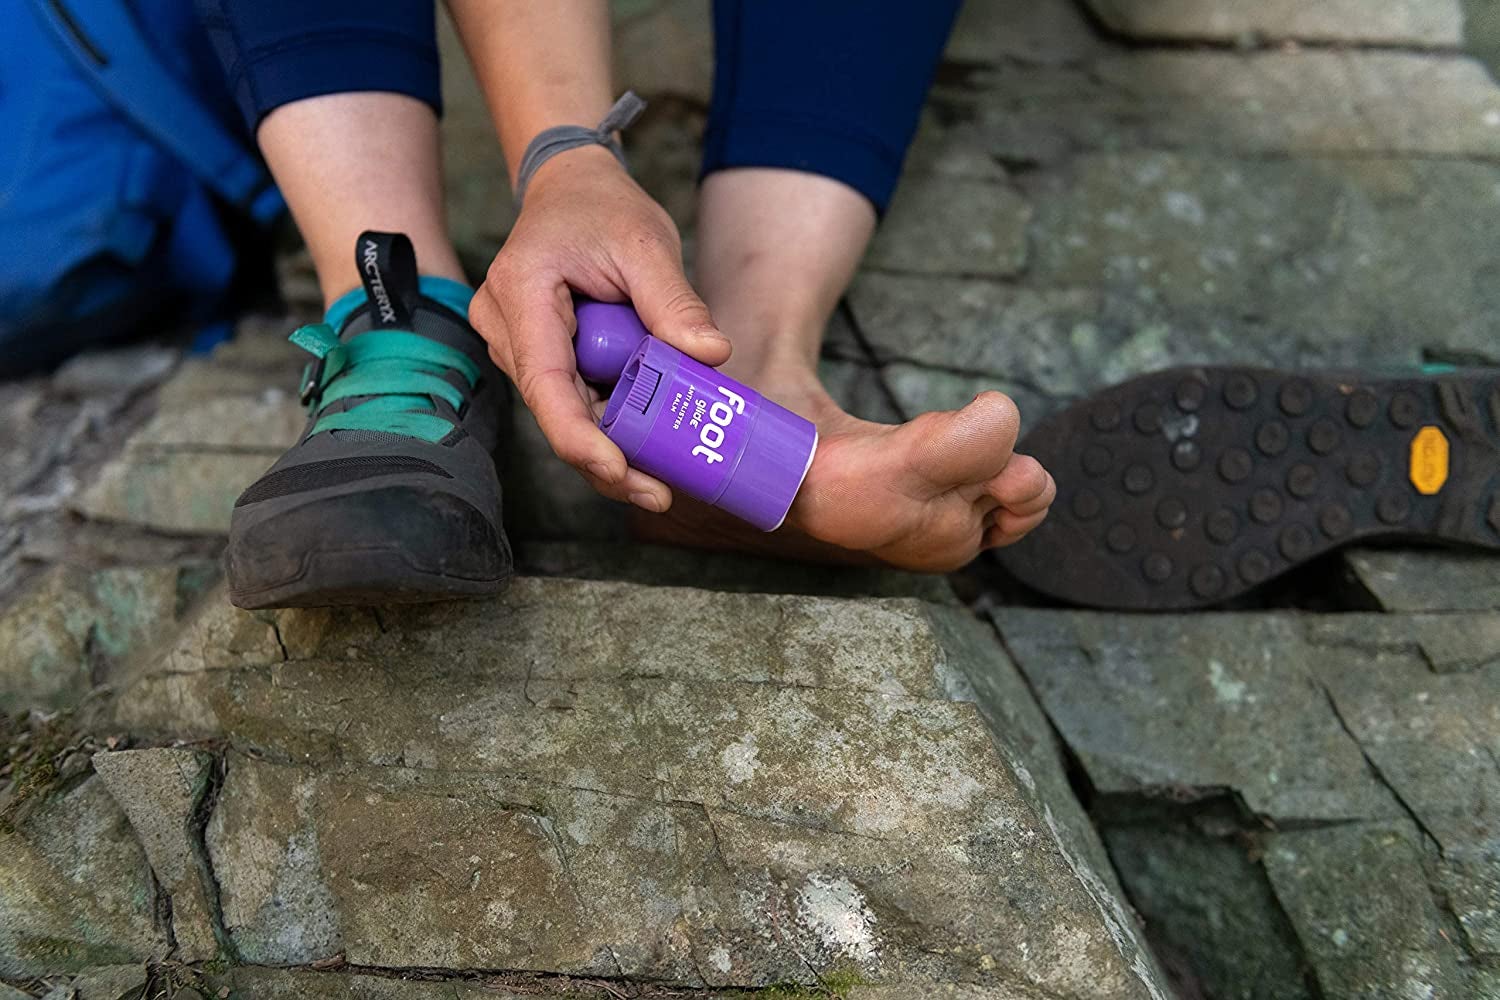 model applies anti-blister balm to side of foot while working out outdoors